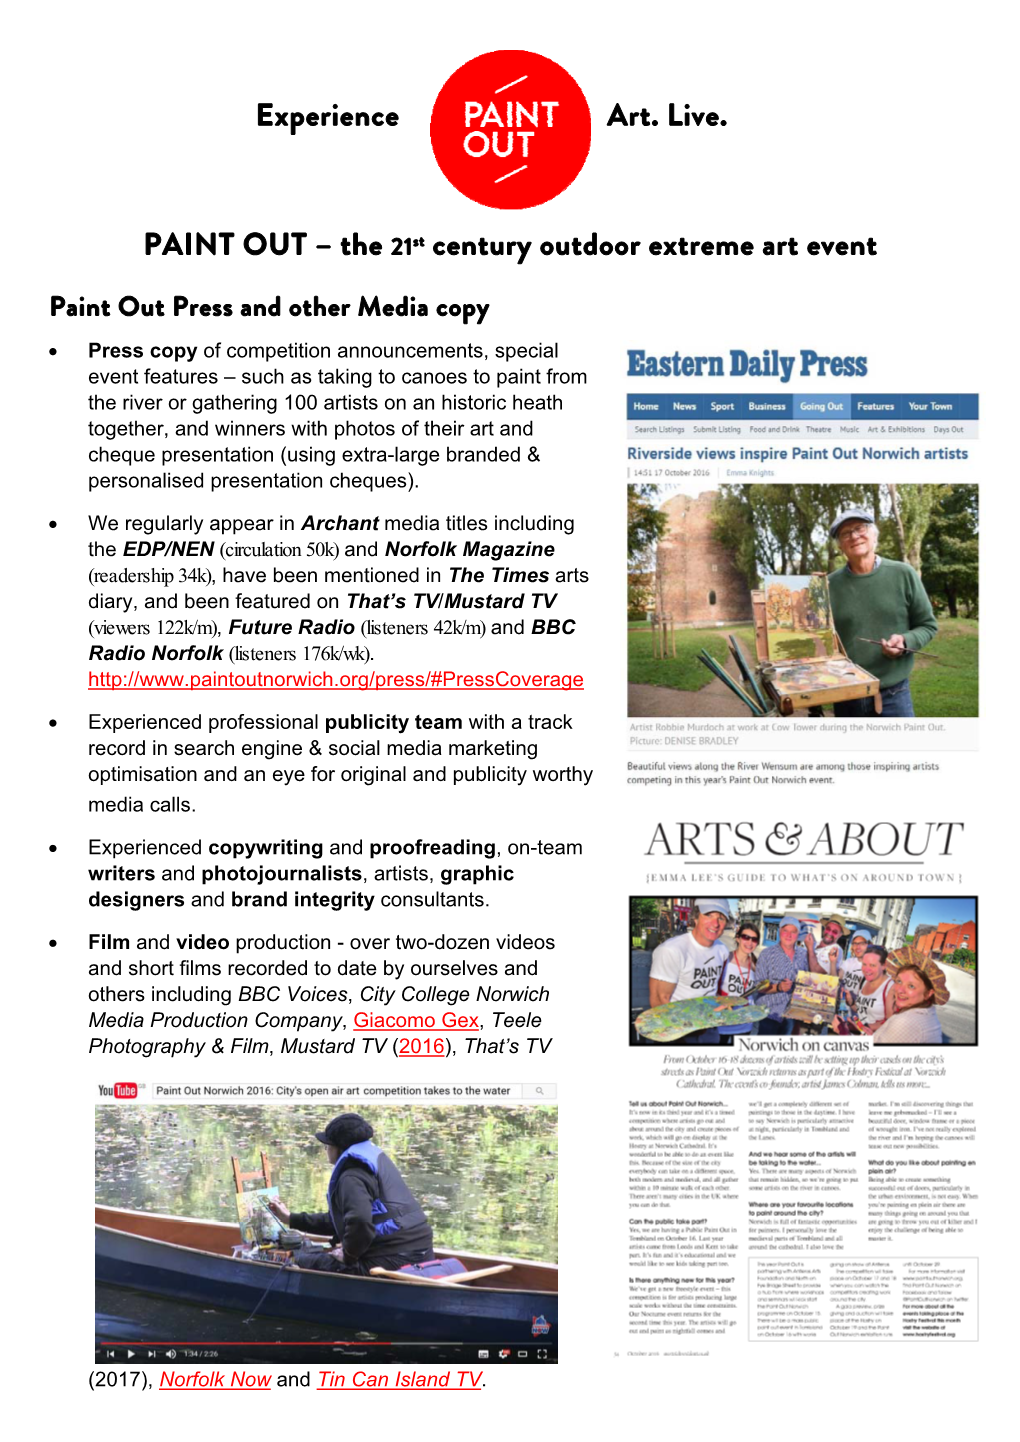 Experience Art. Live. PAINT out – the 21St Century Outdoor Extreme Art